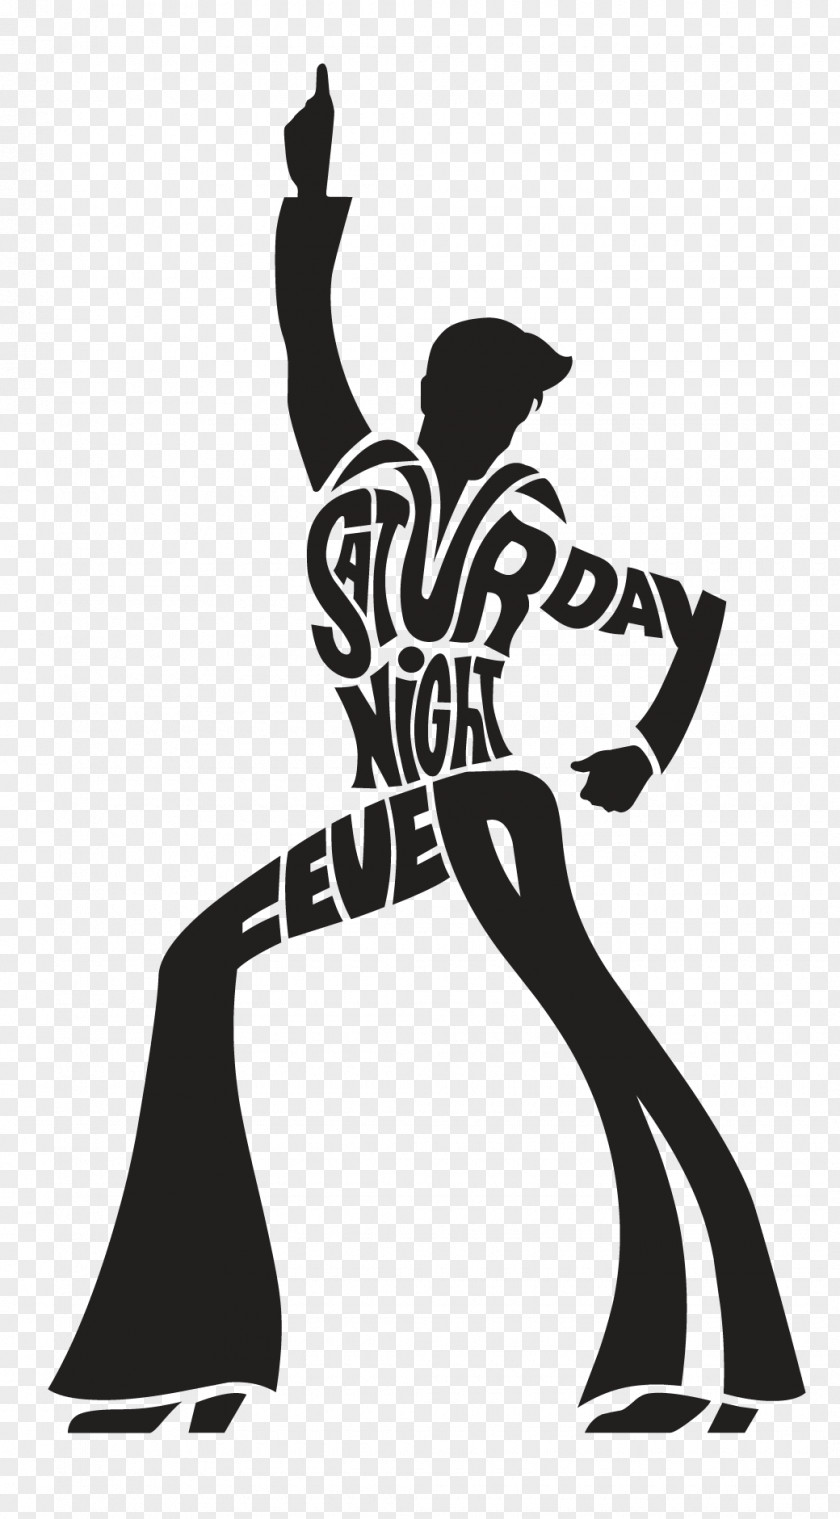 Silhouette Saturday Night Fever Vector Graphics Disco PNG